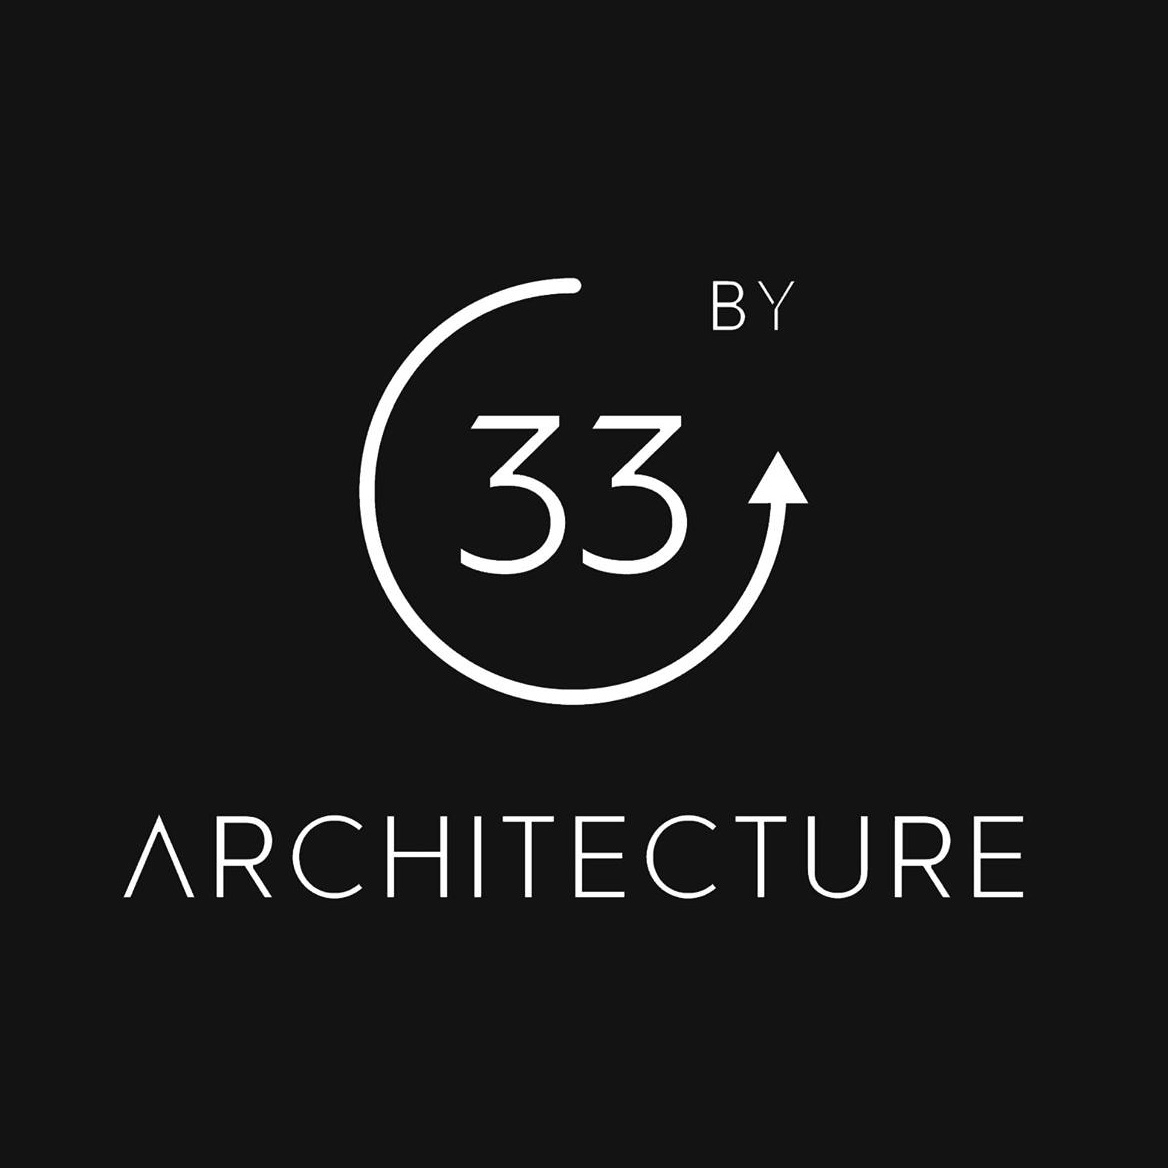 33BY Architecture